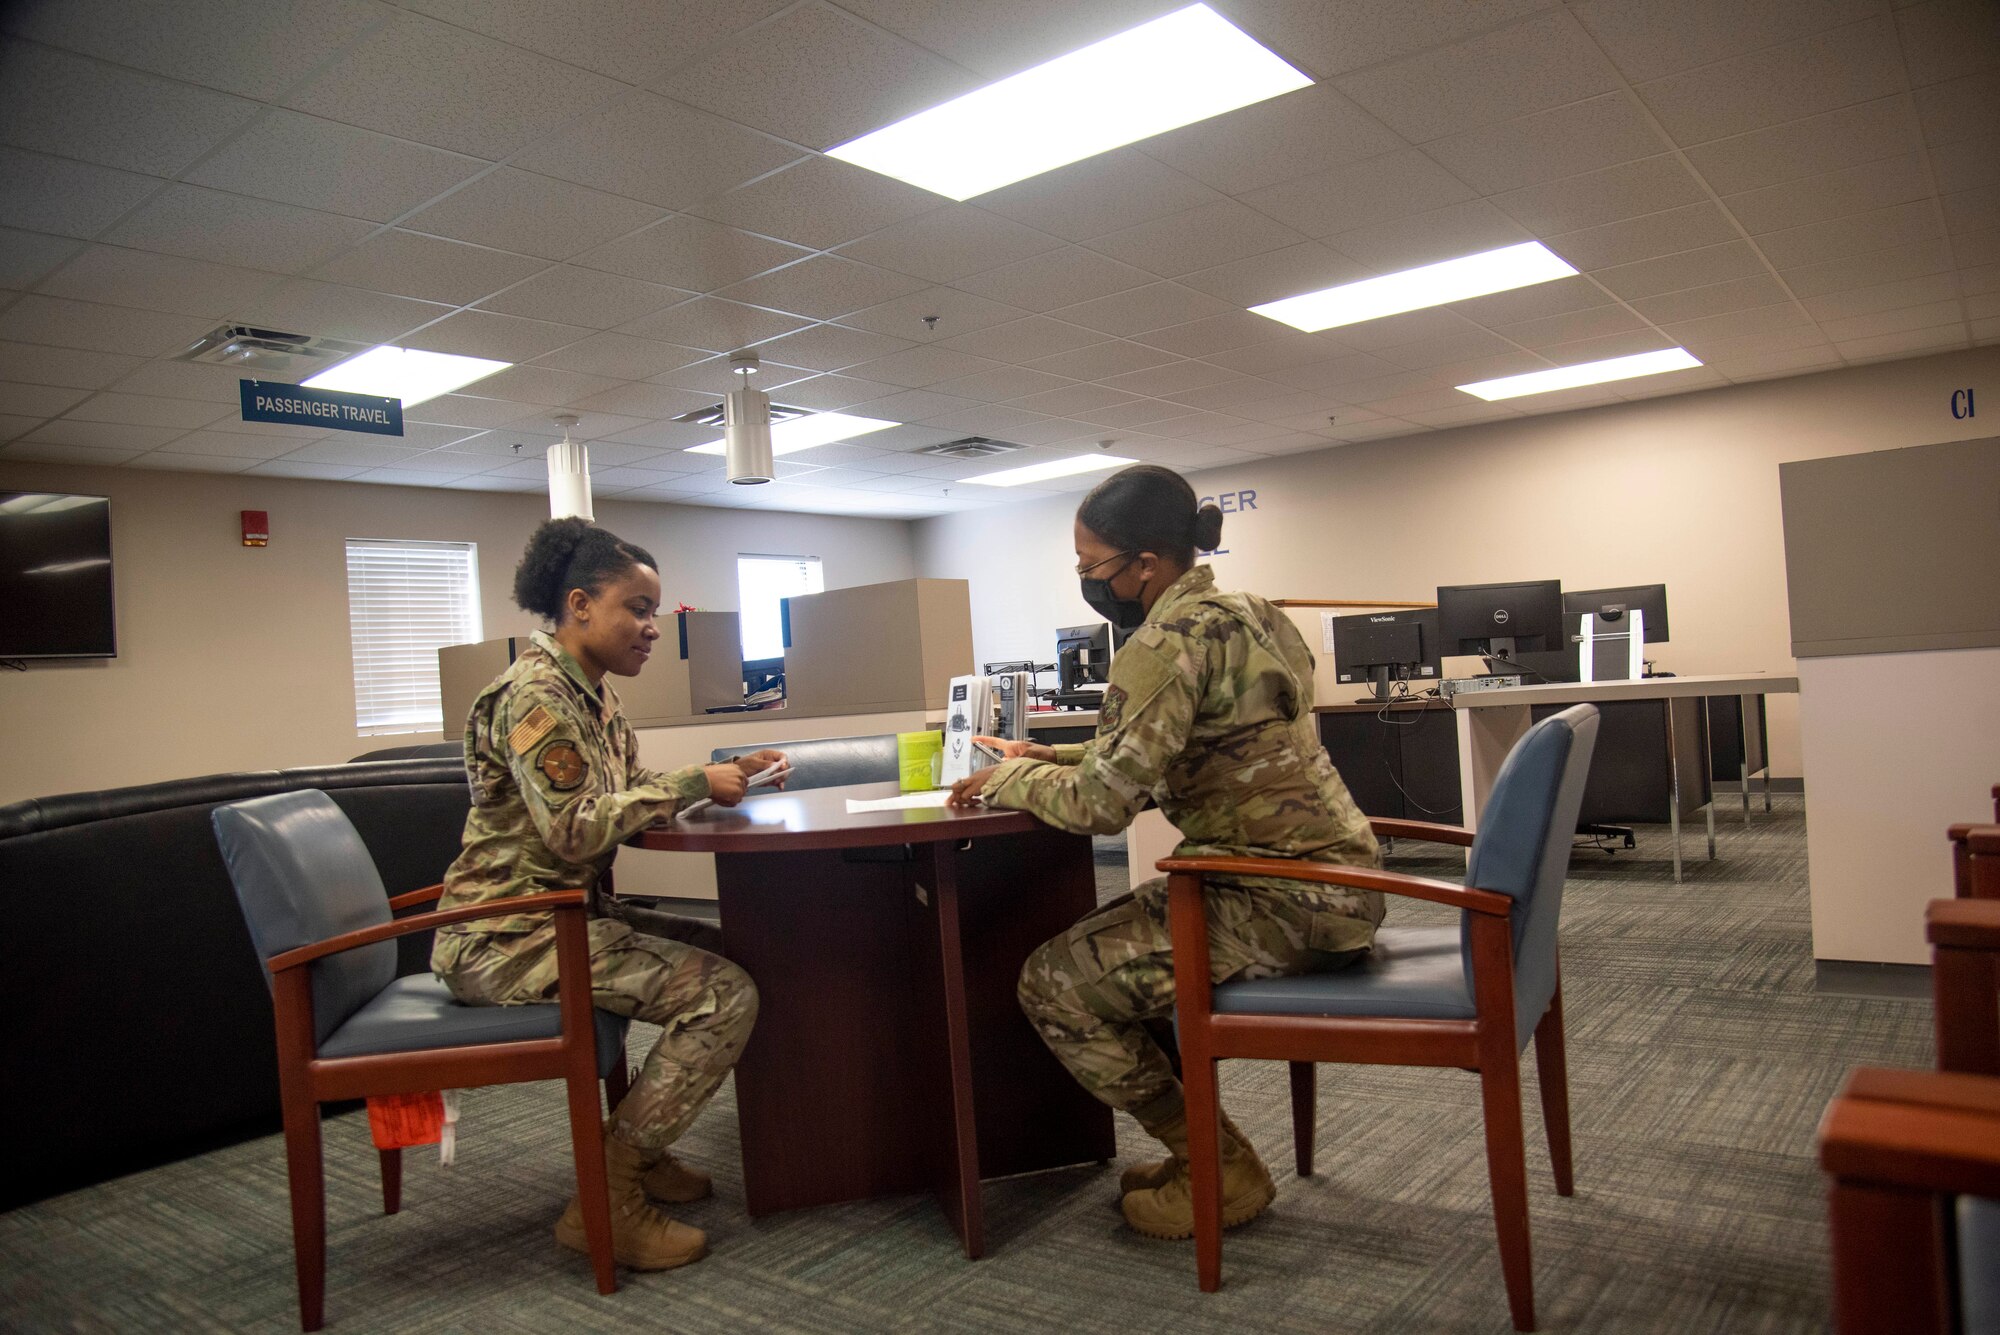 U.S. Air Force Senior Airman Quamashae Riggins, 6th Logistics Readiness Squadron (LRS) Cargo Movement Specialist, briefs an Airman on the 6th LRS Travel Management Office’s personal property processes at MacDill Air Force Base, Florida, May 26, 2021. The 6th LRS TMO personal property section works with the largest area of responsibility in Florida with their peak business season being in the summer months when most permanent change of stations of occur within the military.